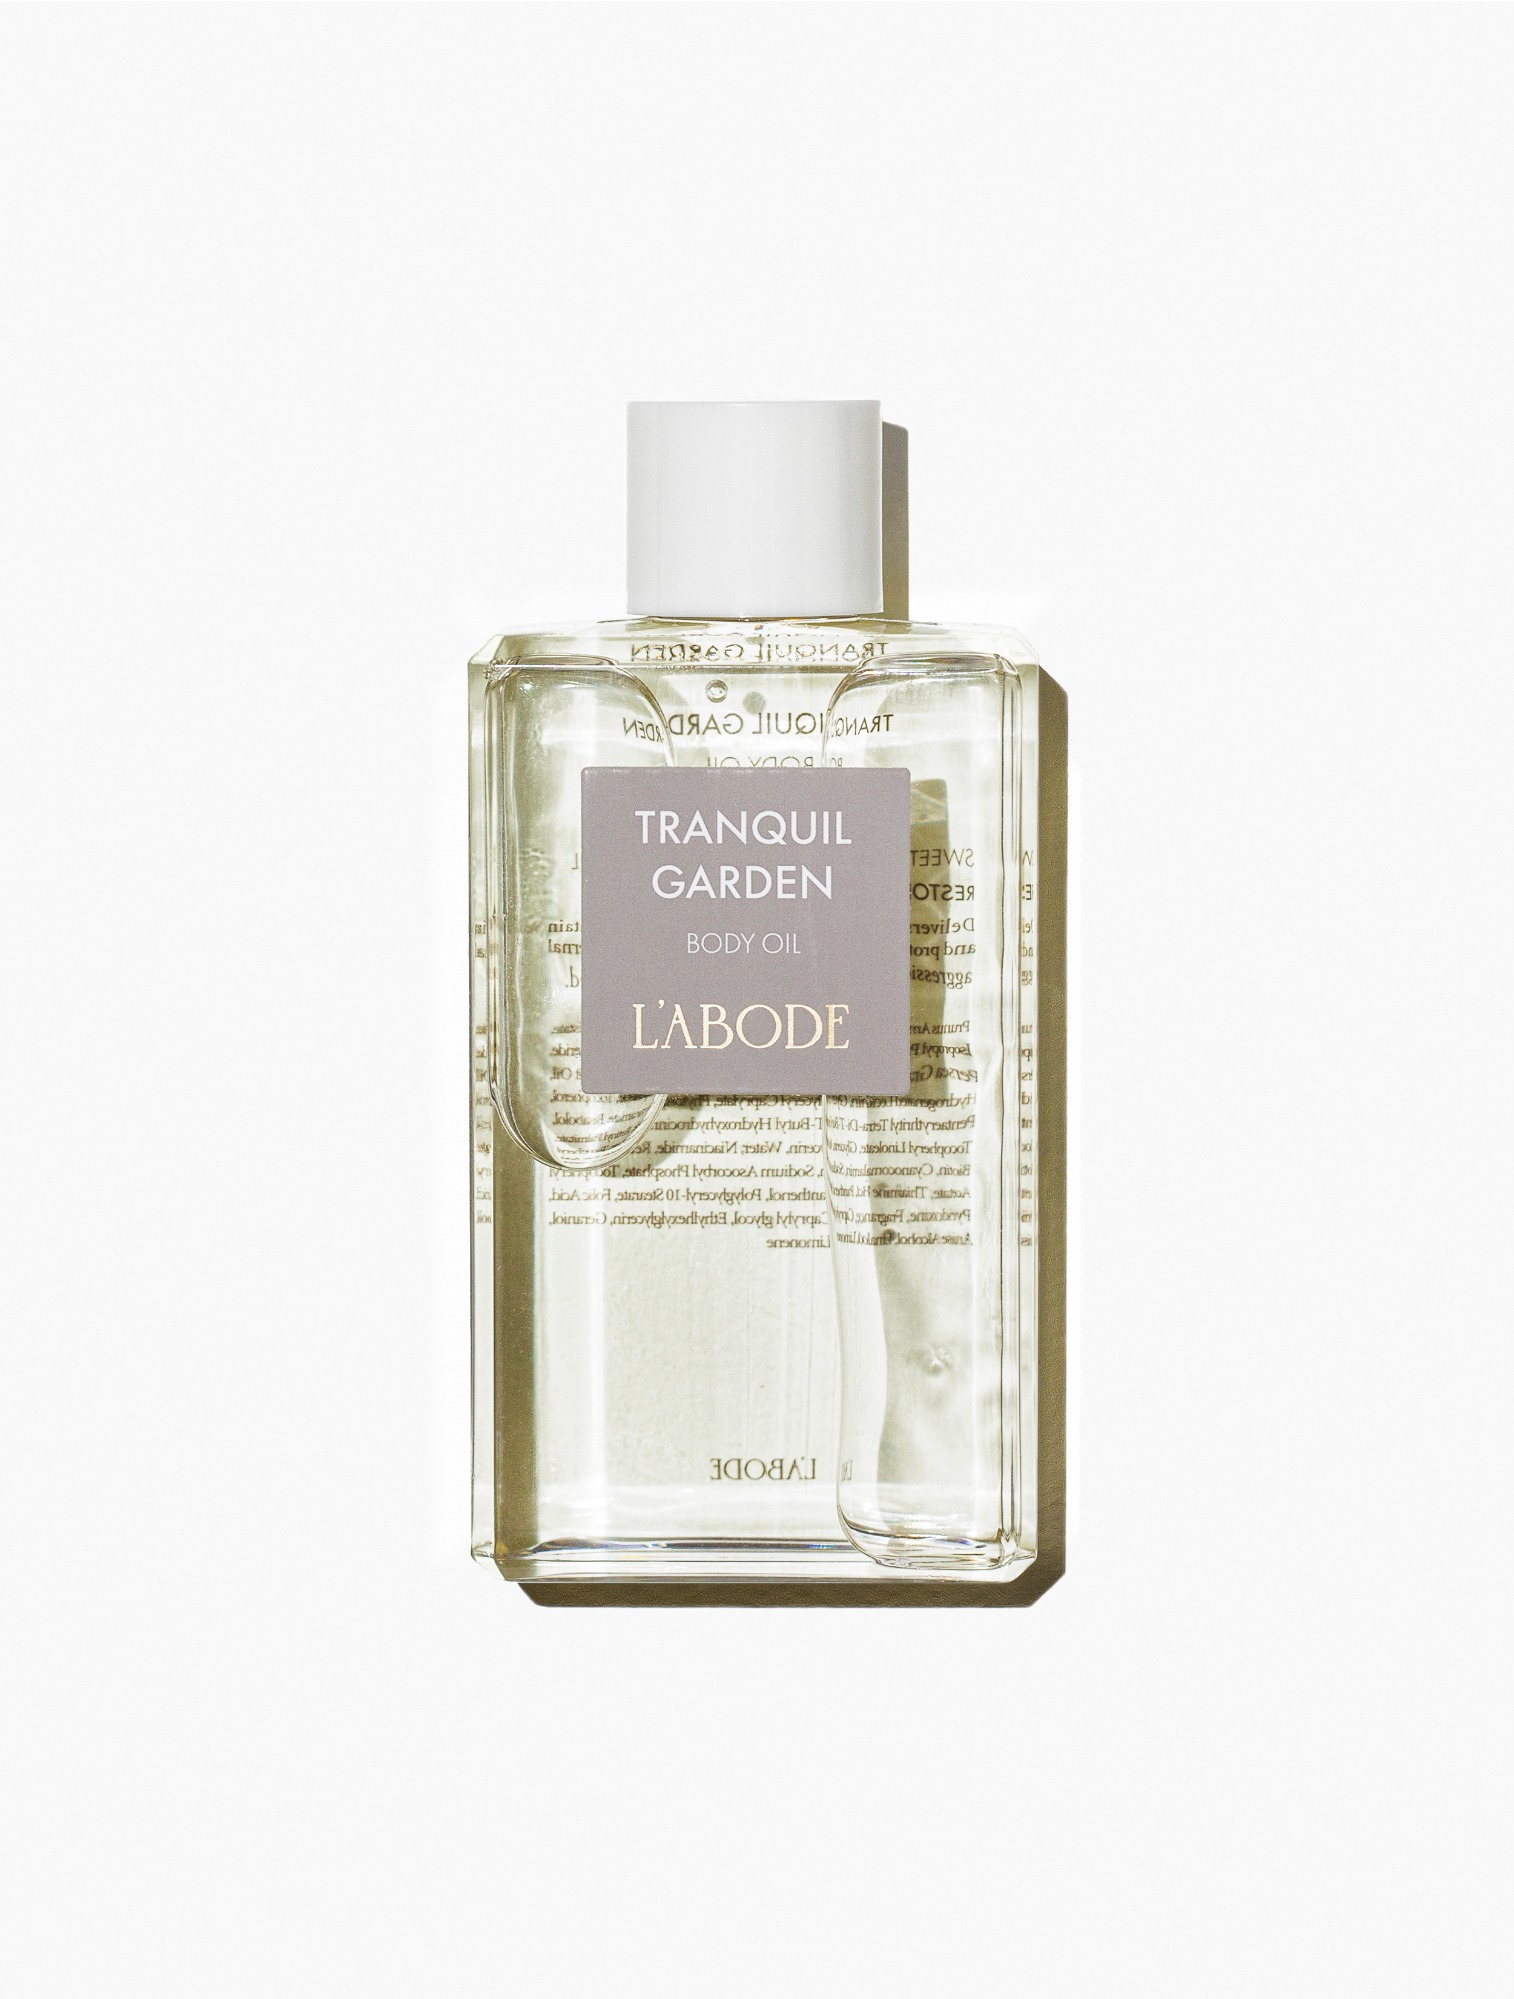 LABODE[HAPPY HOLIDAY🎄] TRANQUIL GARDEN BODY OIL 1+1